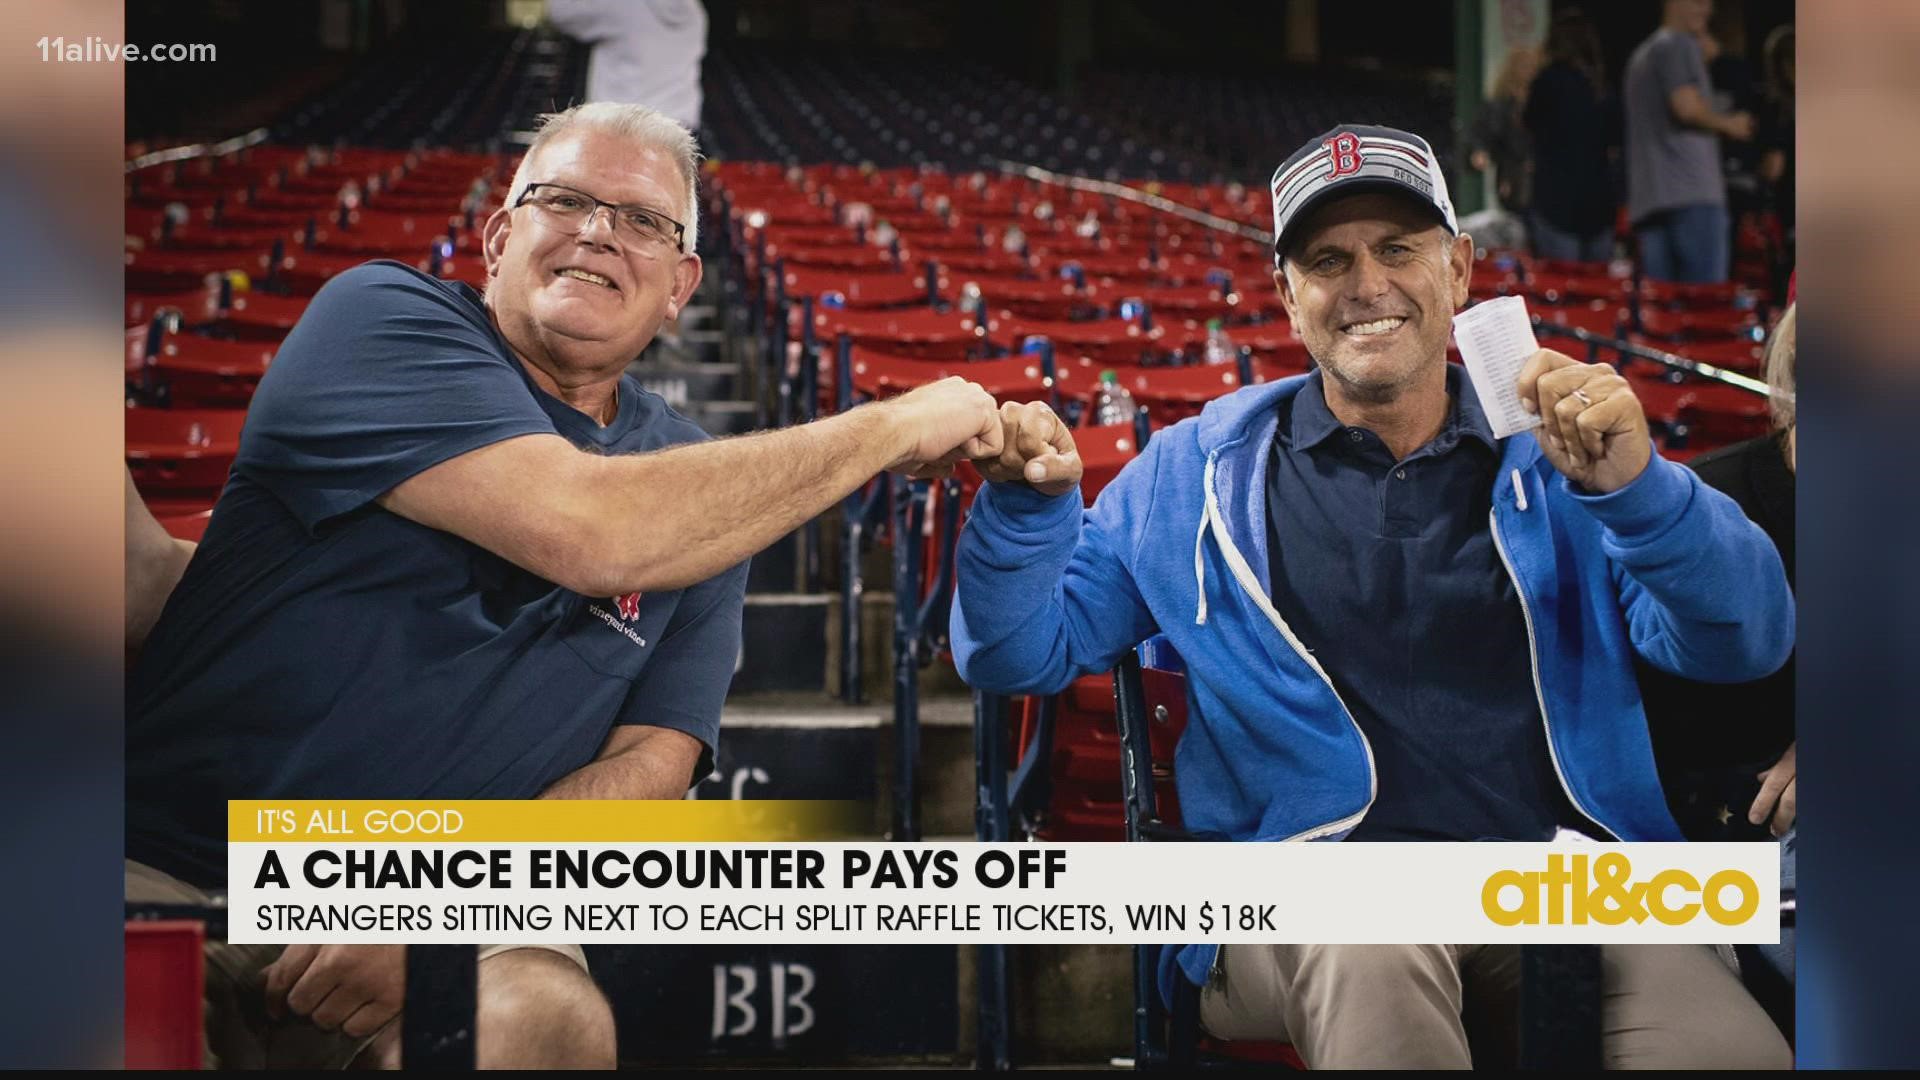 Two random baseball-loving strangers at a Red Sox game agreed to split over $18,000 in a raffle and they WON!